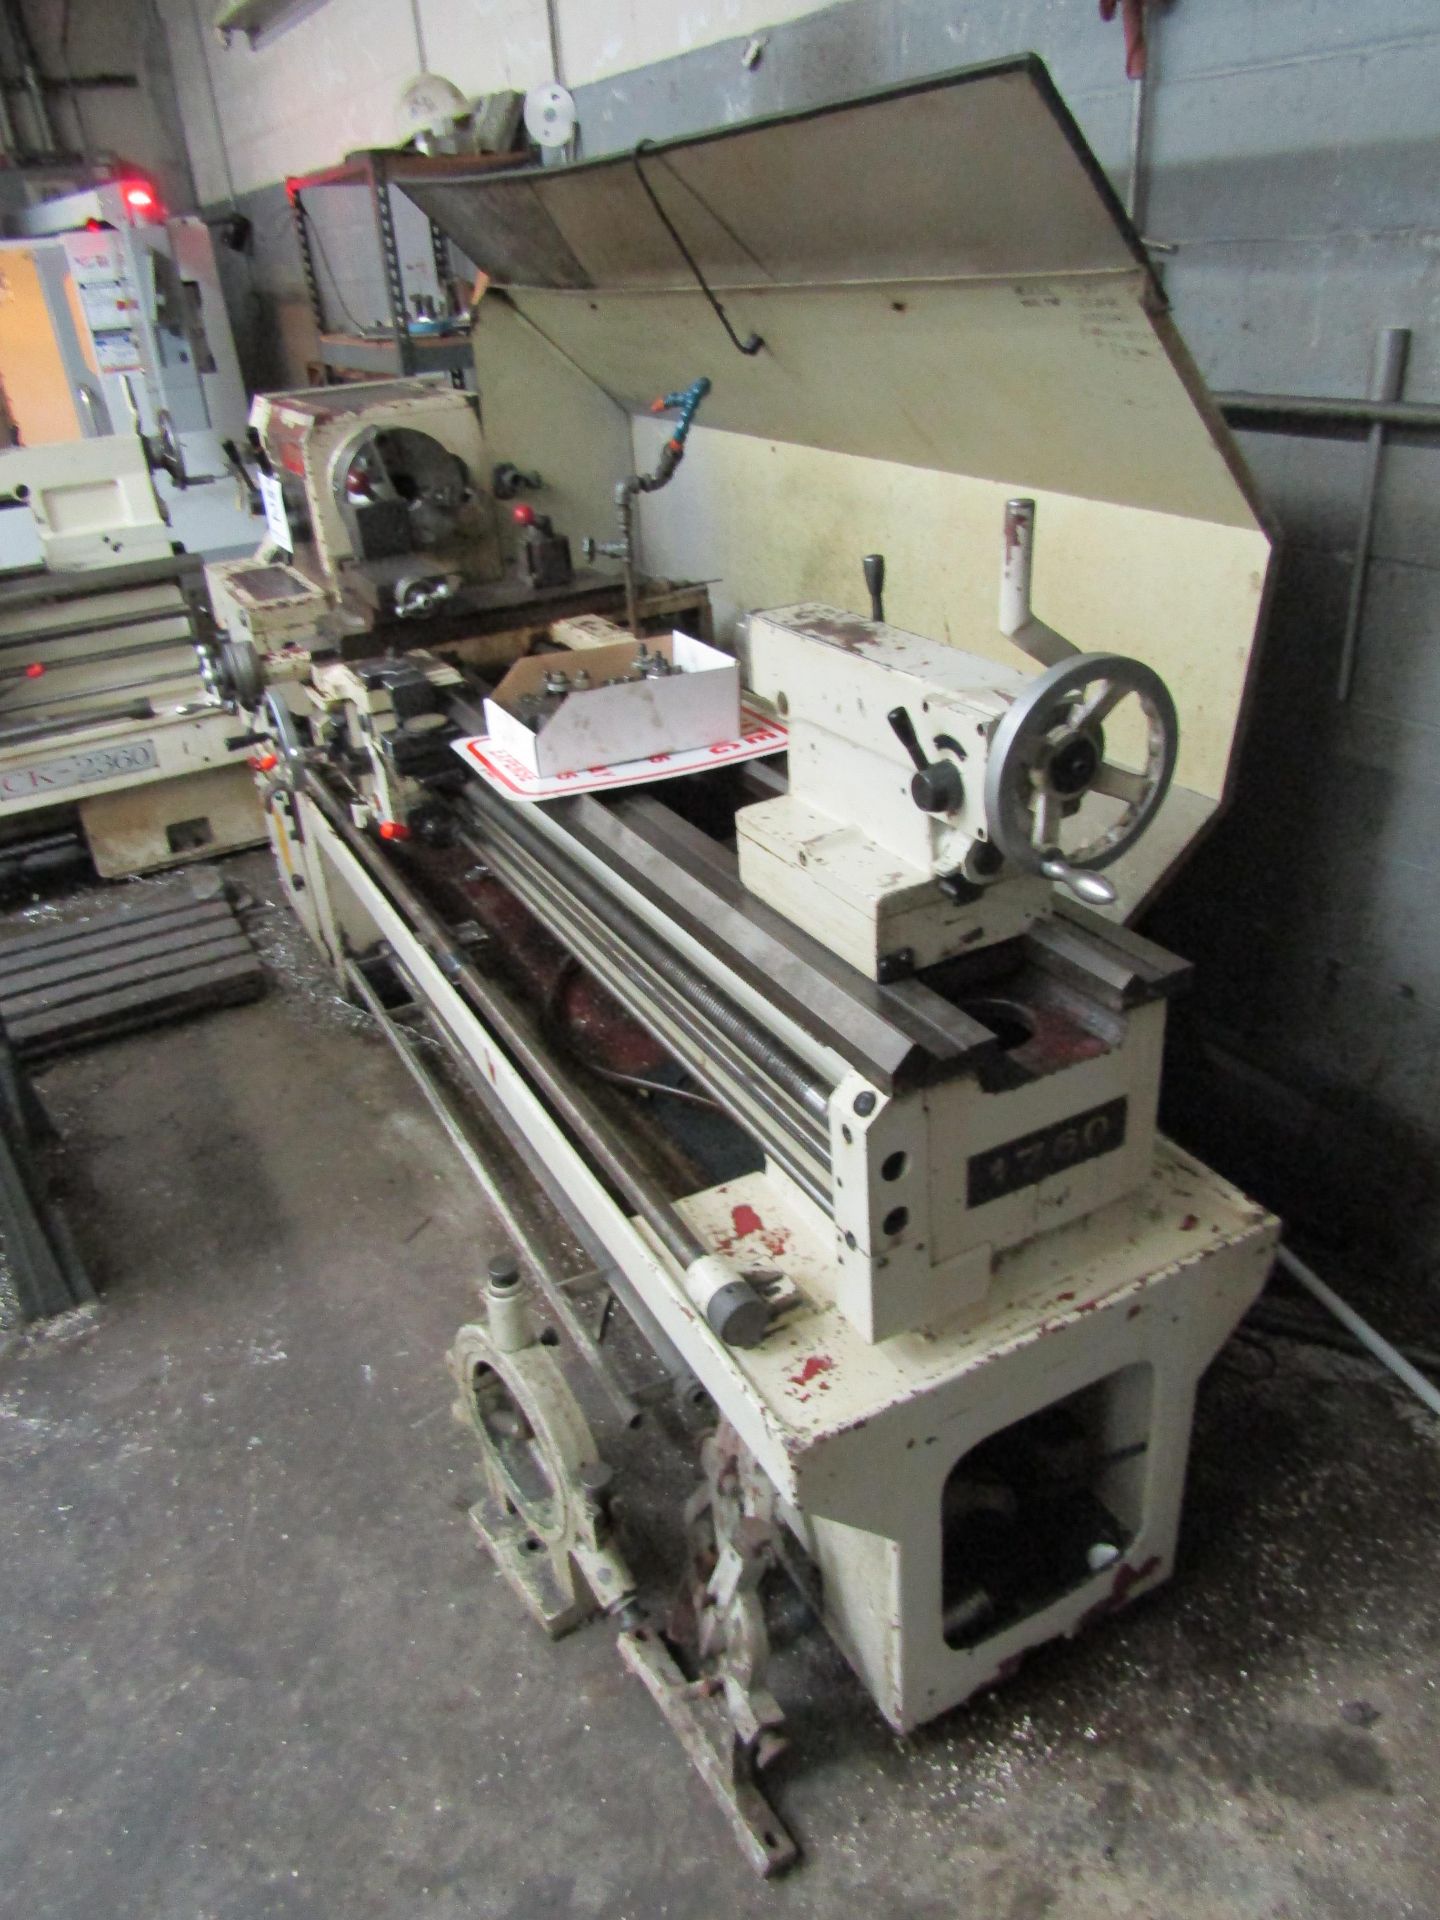 1995 YANG ENGINE LATHE, MODEL YANG-CL48150G, SERIAL B92668, WITH ASSOCIATED TOOL HOLDERS AND TOOLING - Image 7 of 8